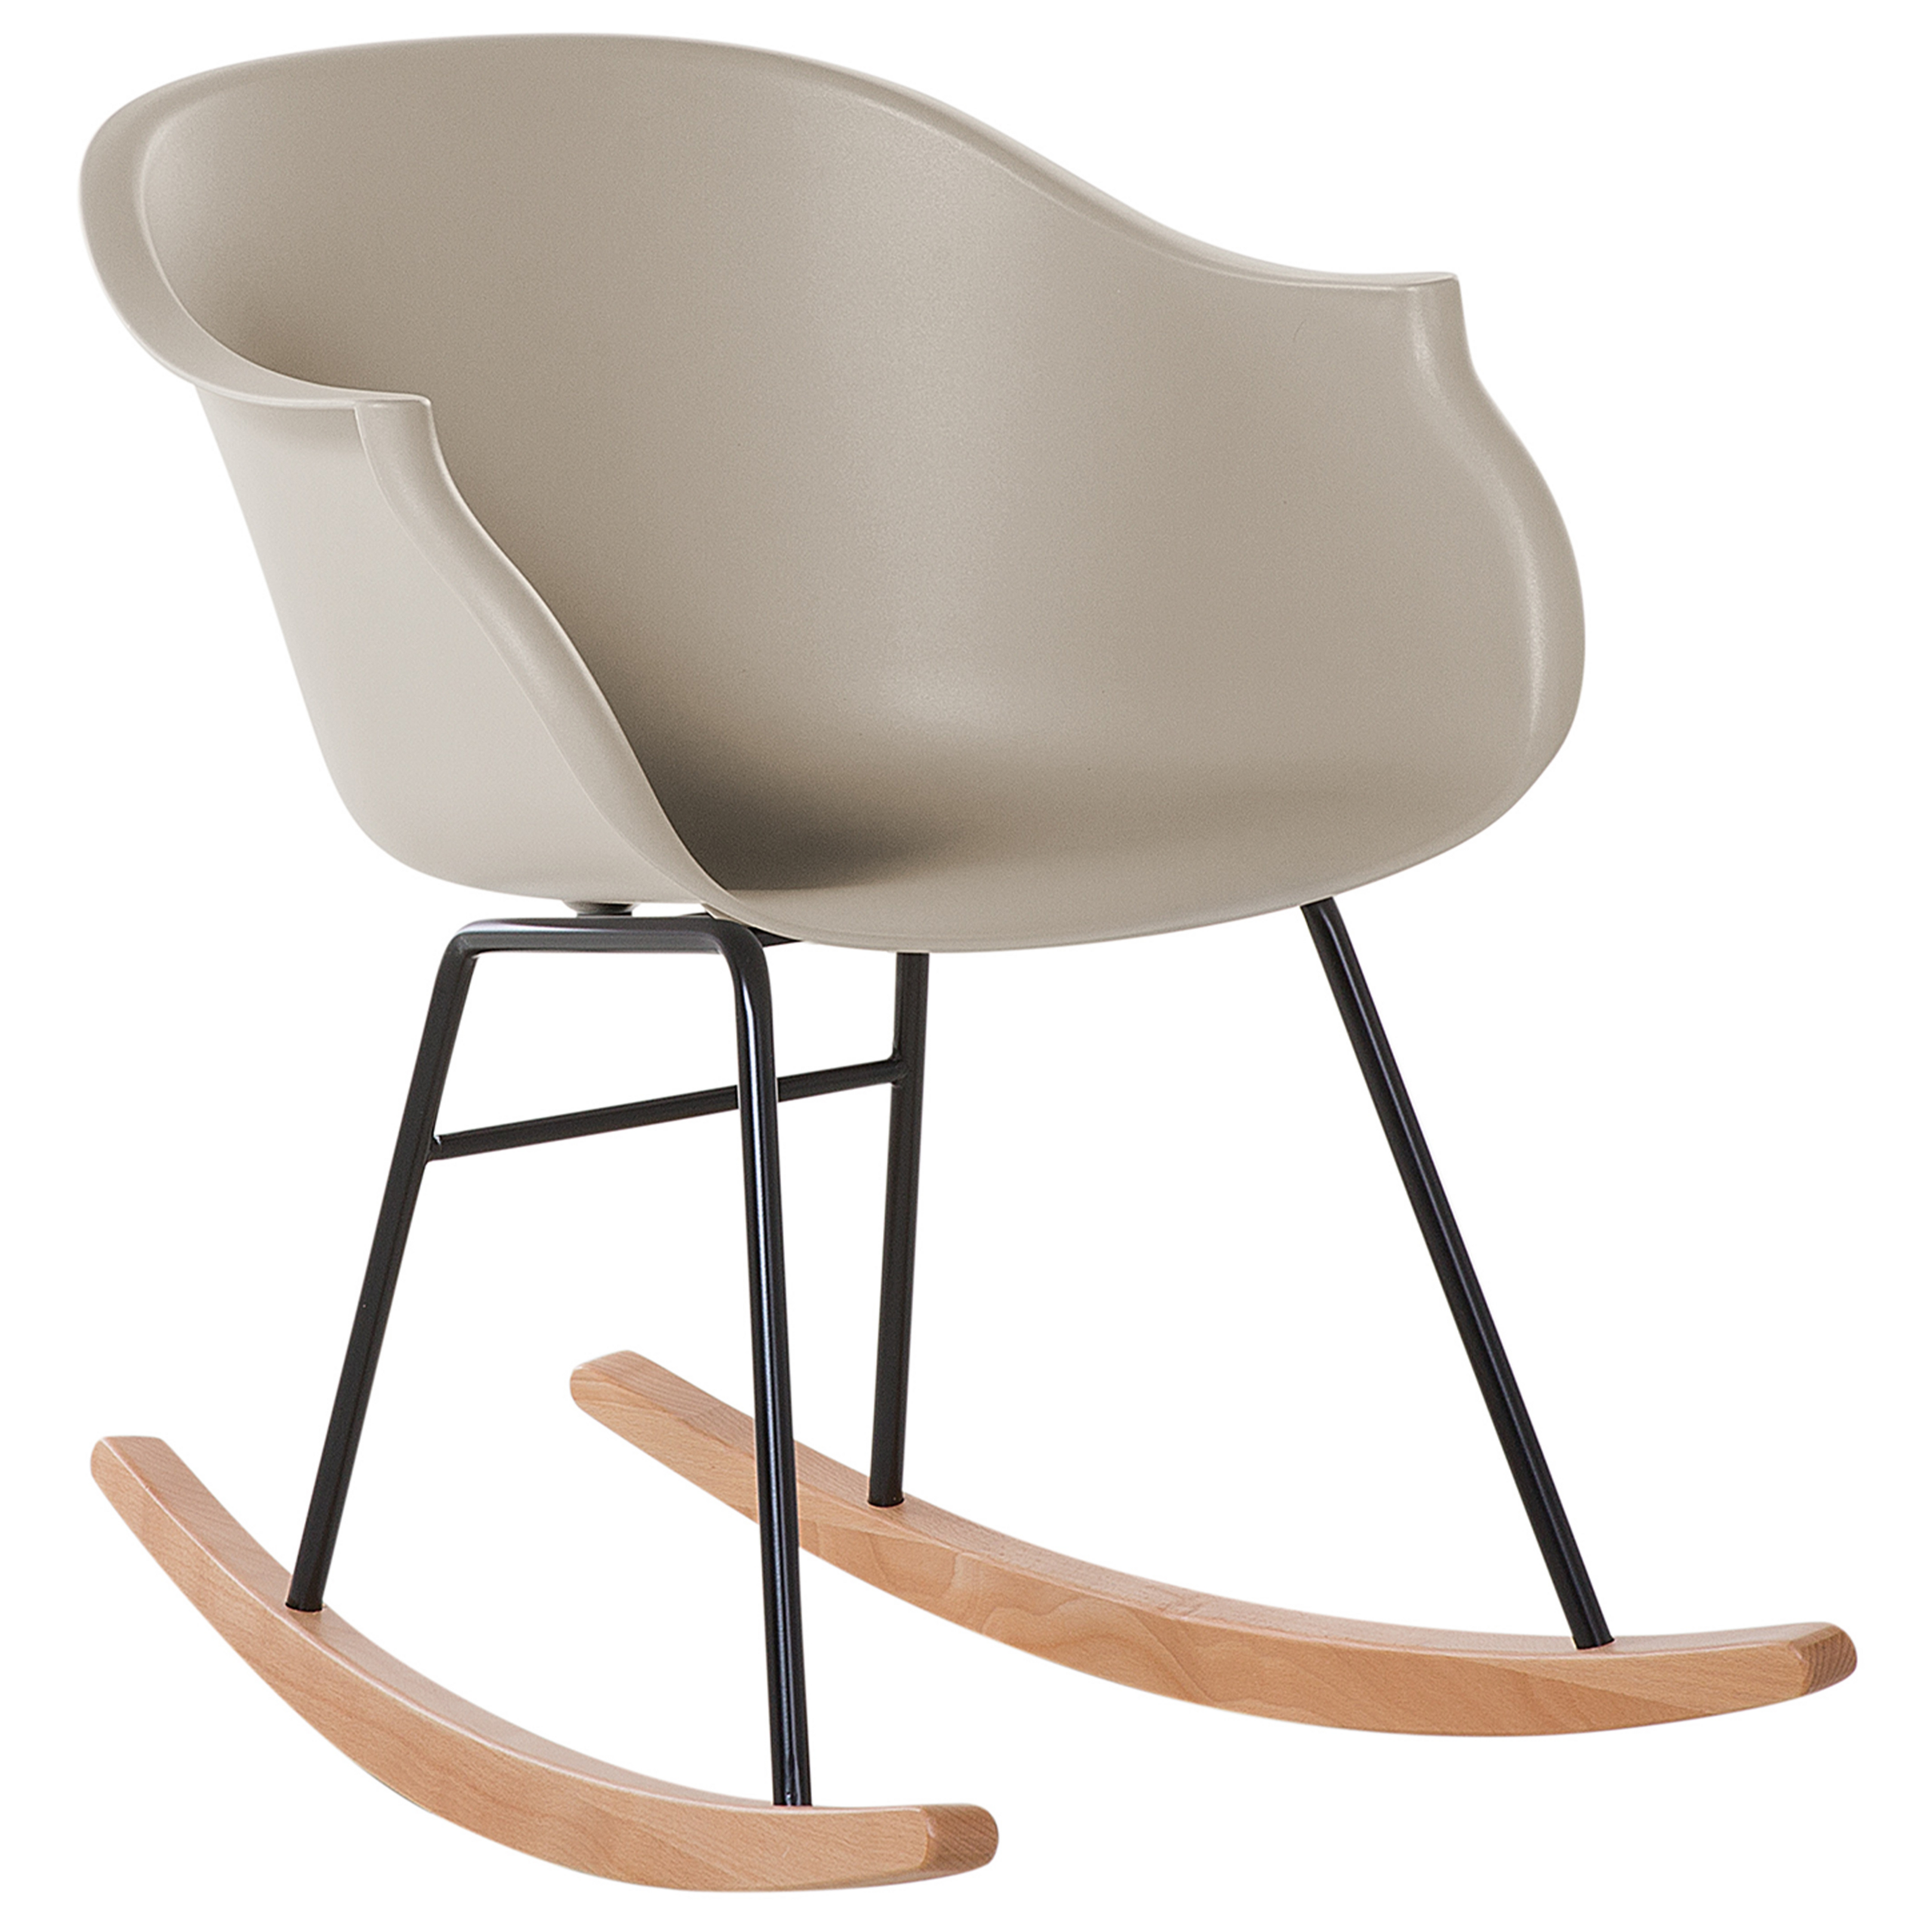 Beliani Rocking Chair Beige Synthetic Material Metal Legs Shell Seat Solid Wood Skates Modern Style